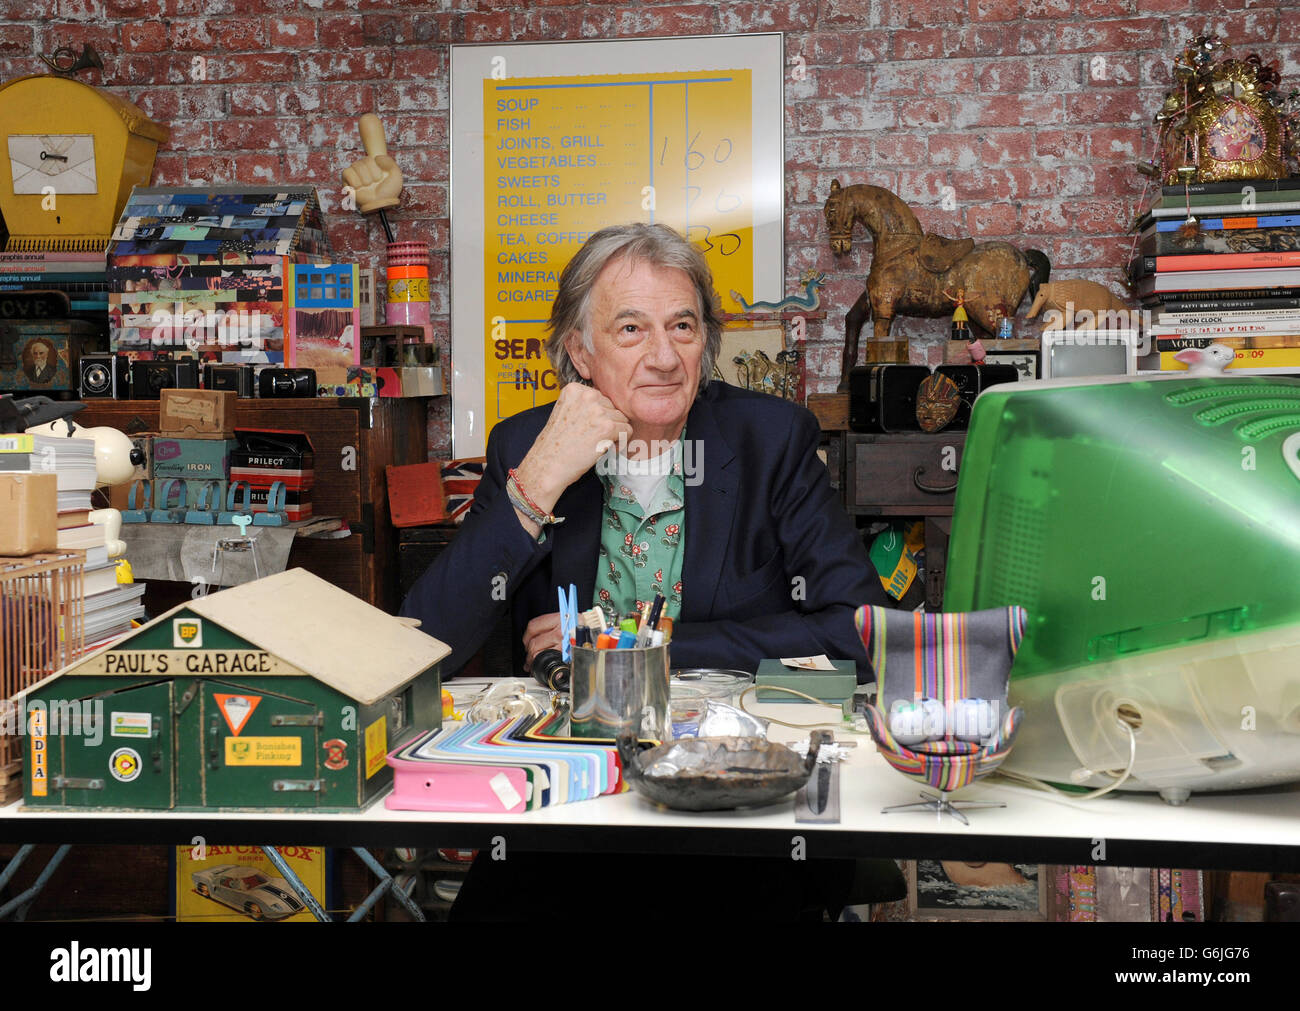 Fashion Designer Paul Smith poses for photographs in a replica of one of his original working spaces at the opening of his new exhibition 'Hello, My Name is Paul Smith' at the Design Museum, London. The exhibition features hundreds of objects from the designers personal archive, including photographs, objects and many of his clothing designs from throughout his career. Stock Photo